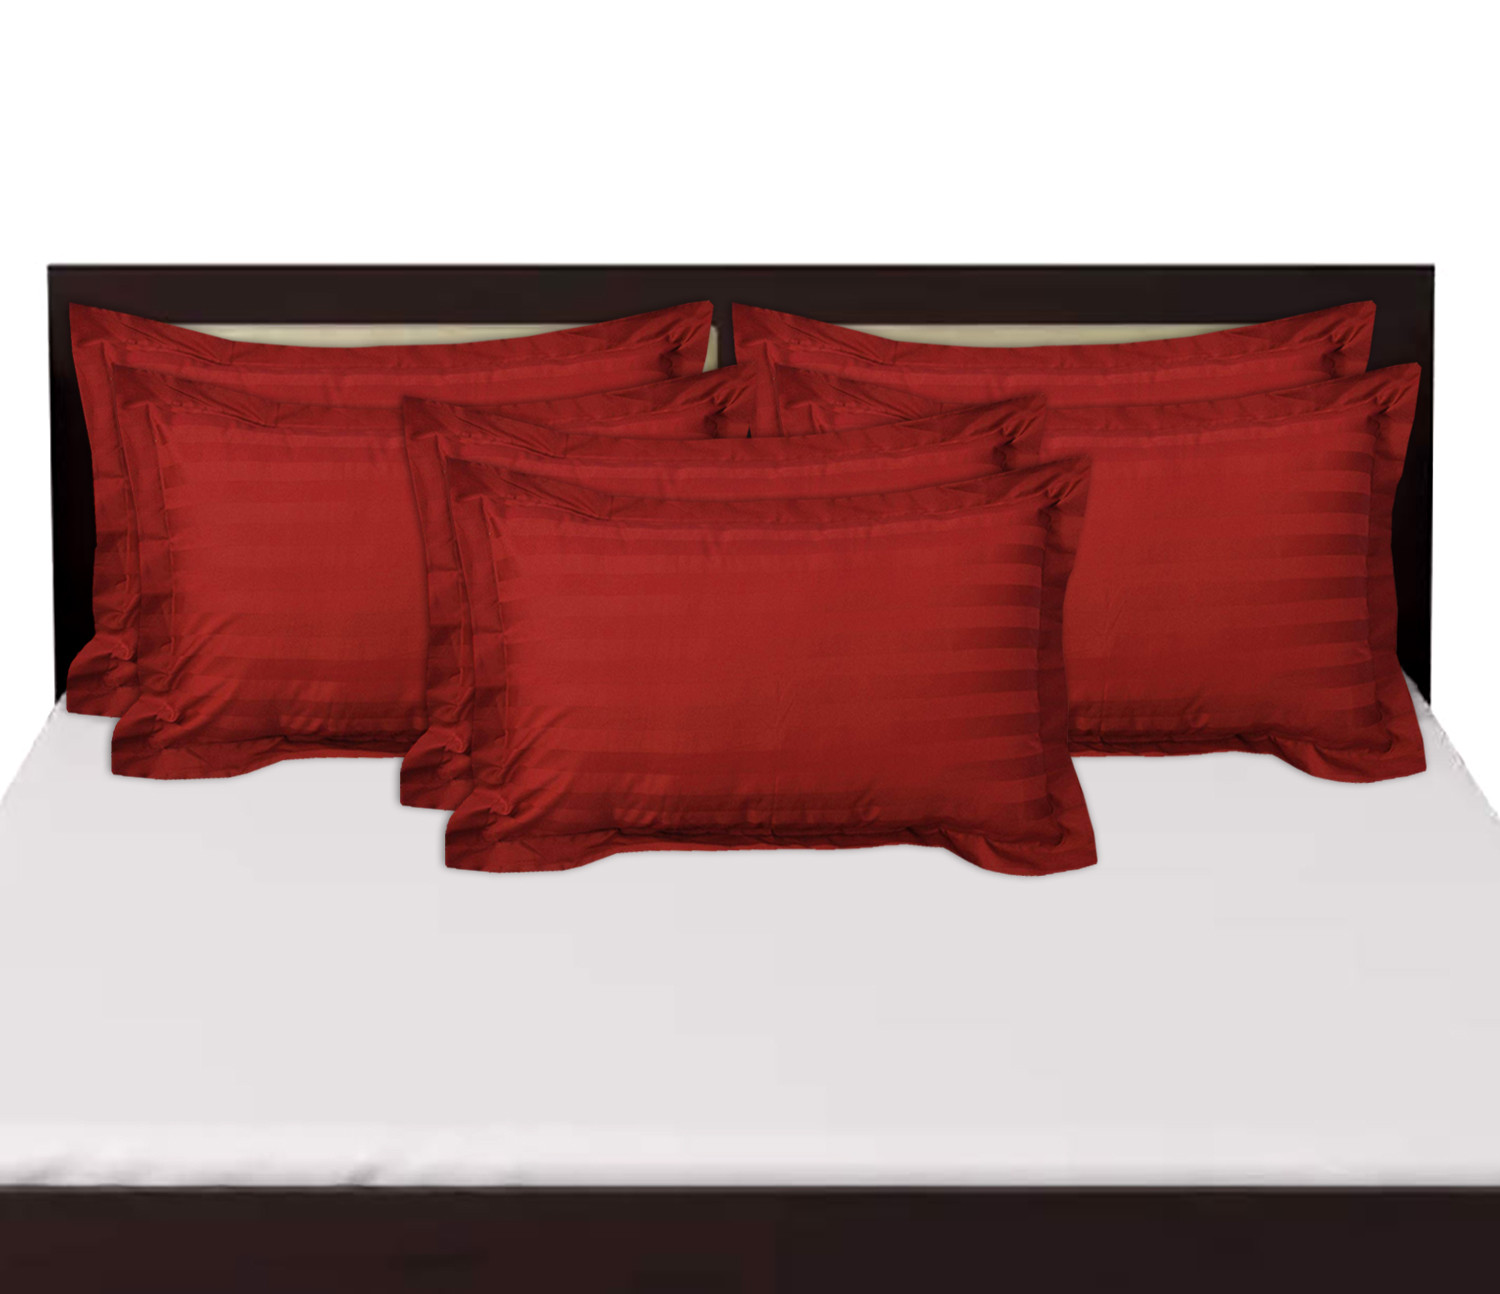 Kuber Industries Lining Design Breathable & Soft Cotton Pillow Cover/Protector/Case- 18x28 Inch,(Red)-HS43KUBMART26785